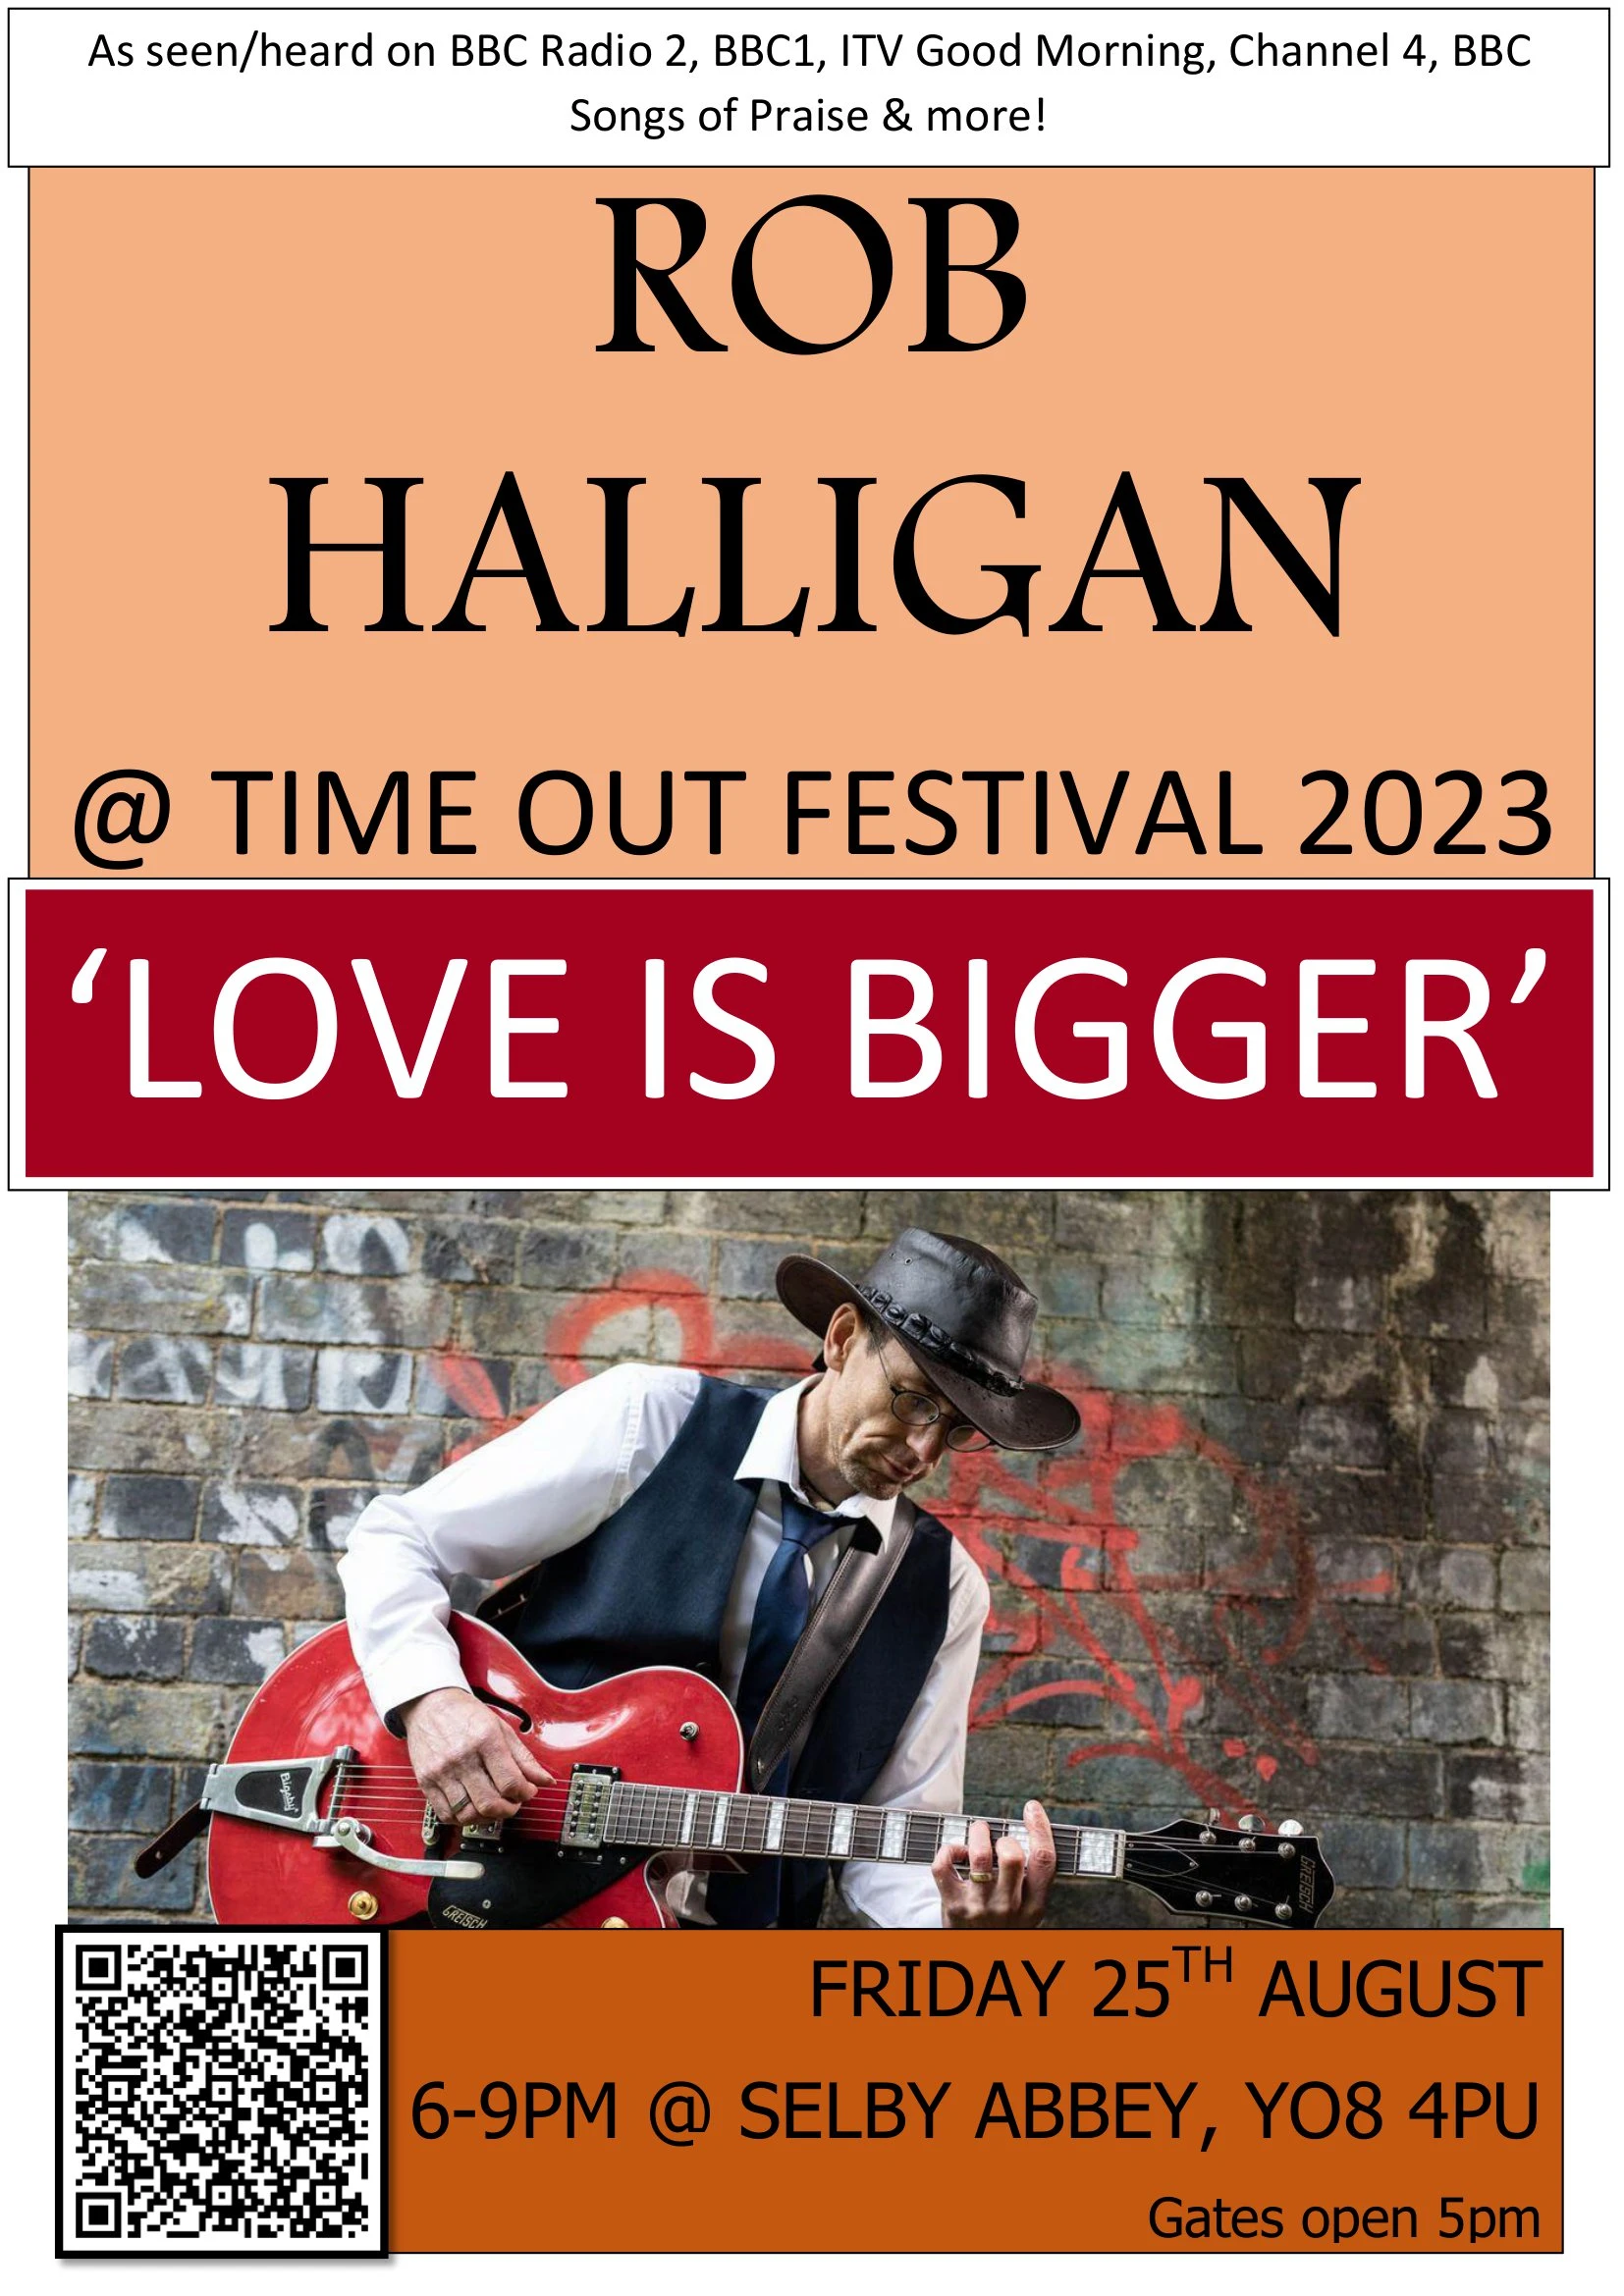 525-august-25th-2023-youth-event-rob-halligan-poster-16890859997081.jpg